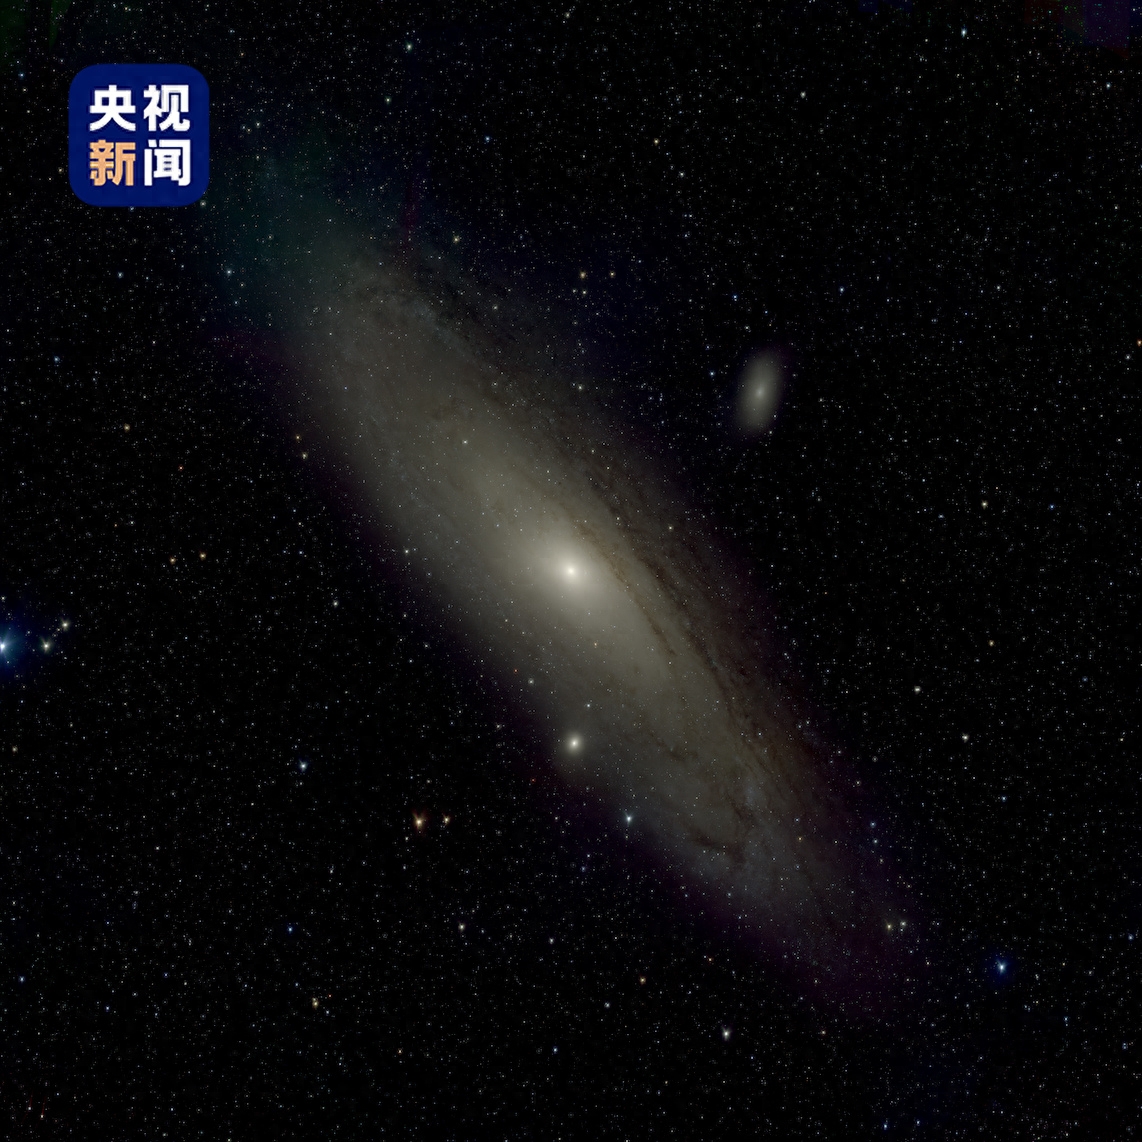 The Mozi Sky Survey Telescope has officially been put into observation and released photos of the Andromeda galaxy